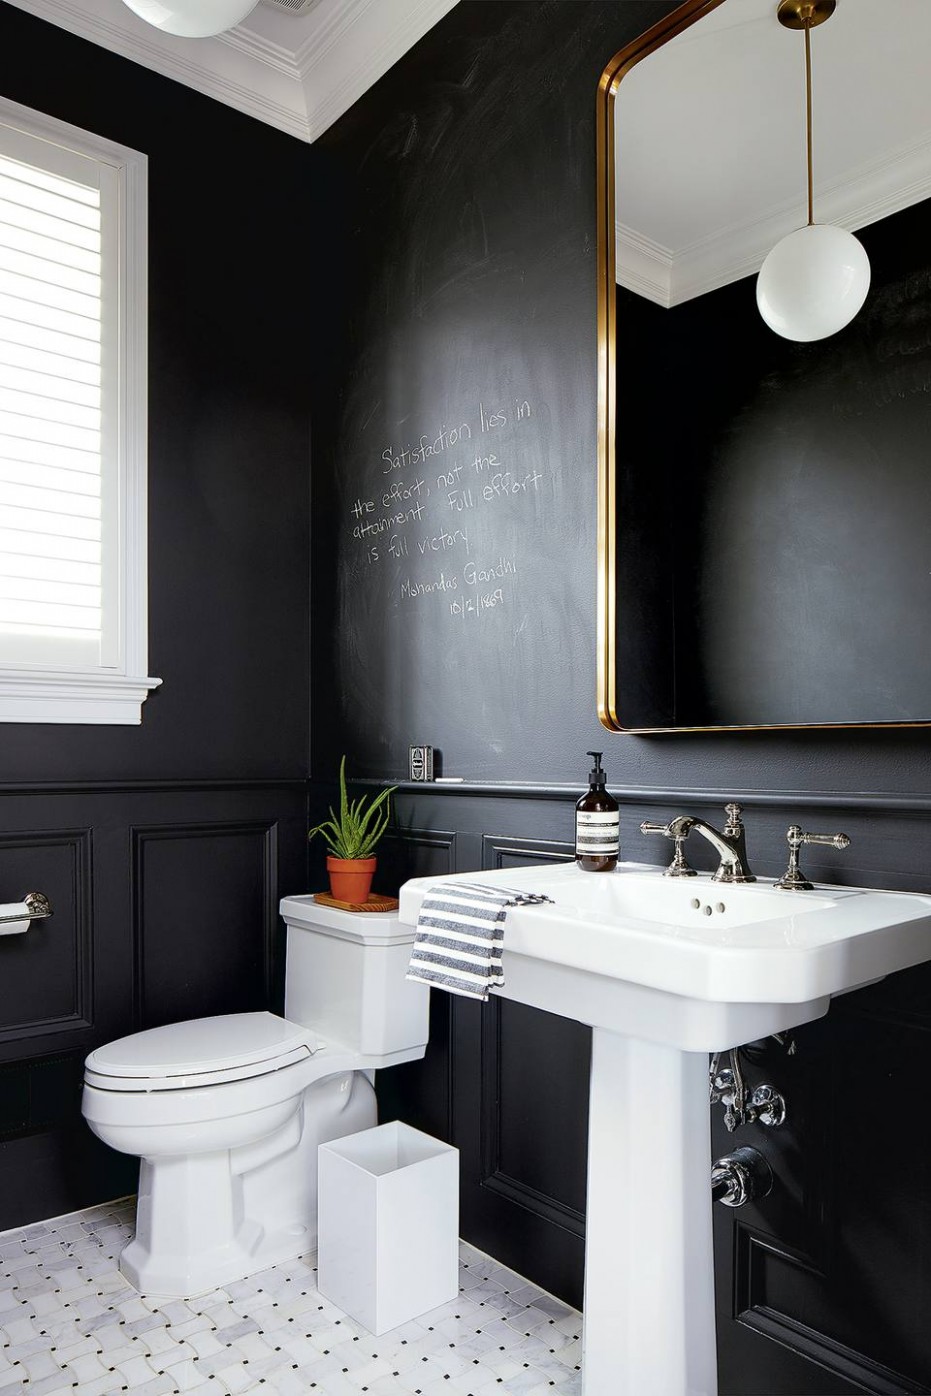 10 Sophisticated Chalkboard Paint Ideas For Homes How Do You Paint Over Chalkboard Paint